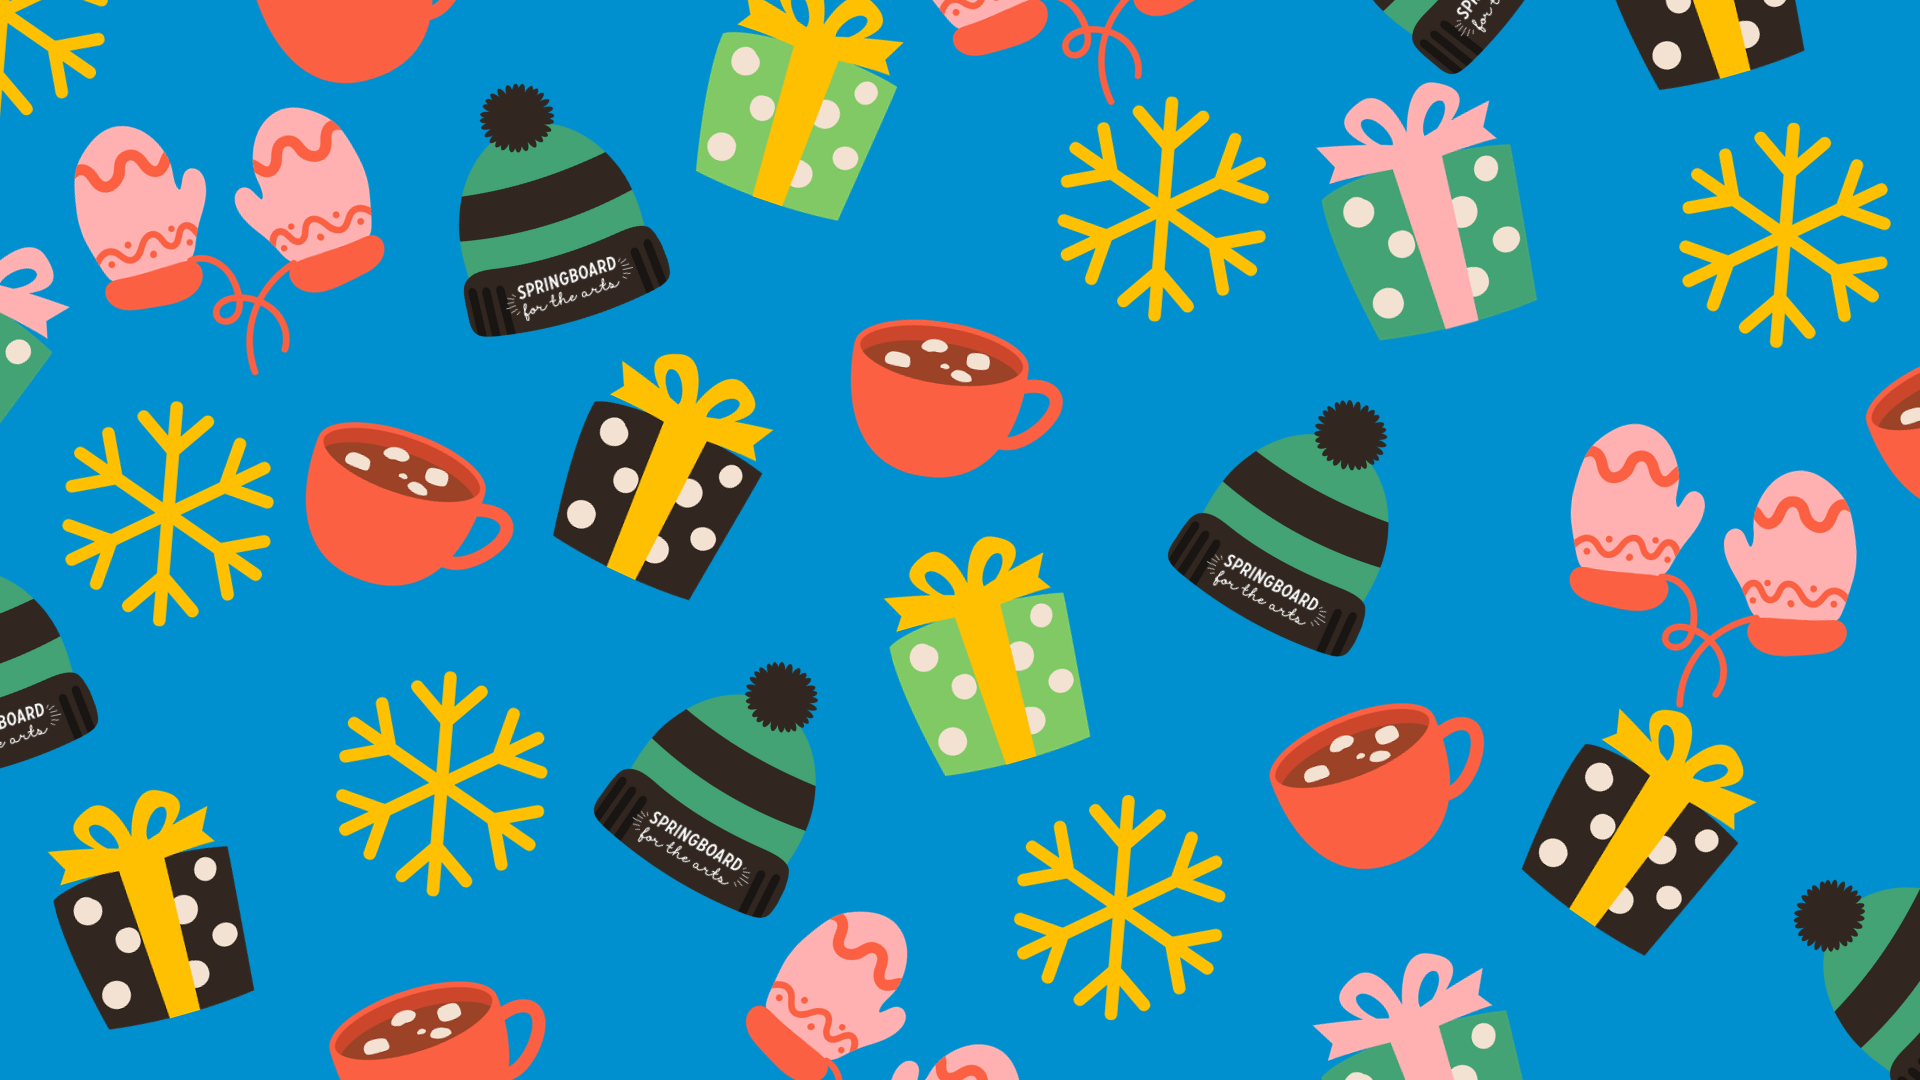 A colorful graphic featuring illustrated presents, mittens, hot chocolate, and beanies representing Last Minute Gifts holiday market, presented by Springboard for the Arts